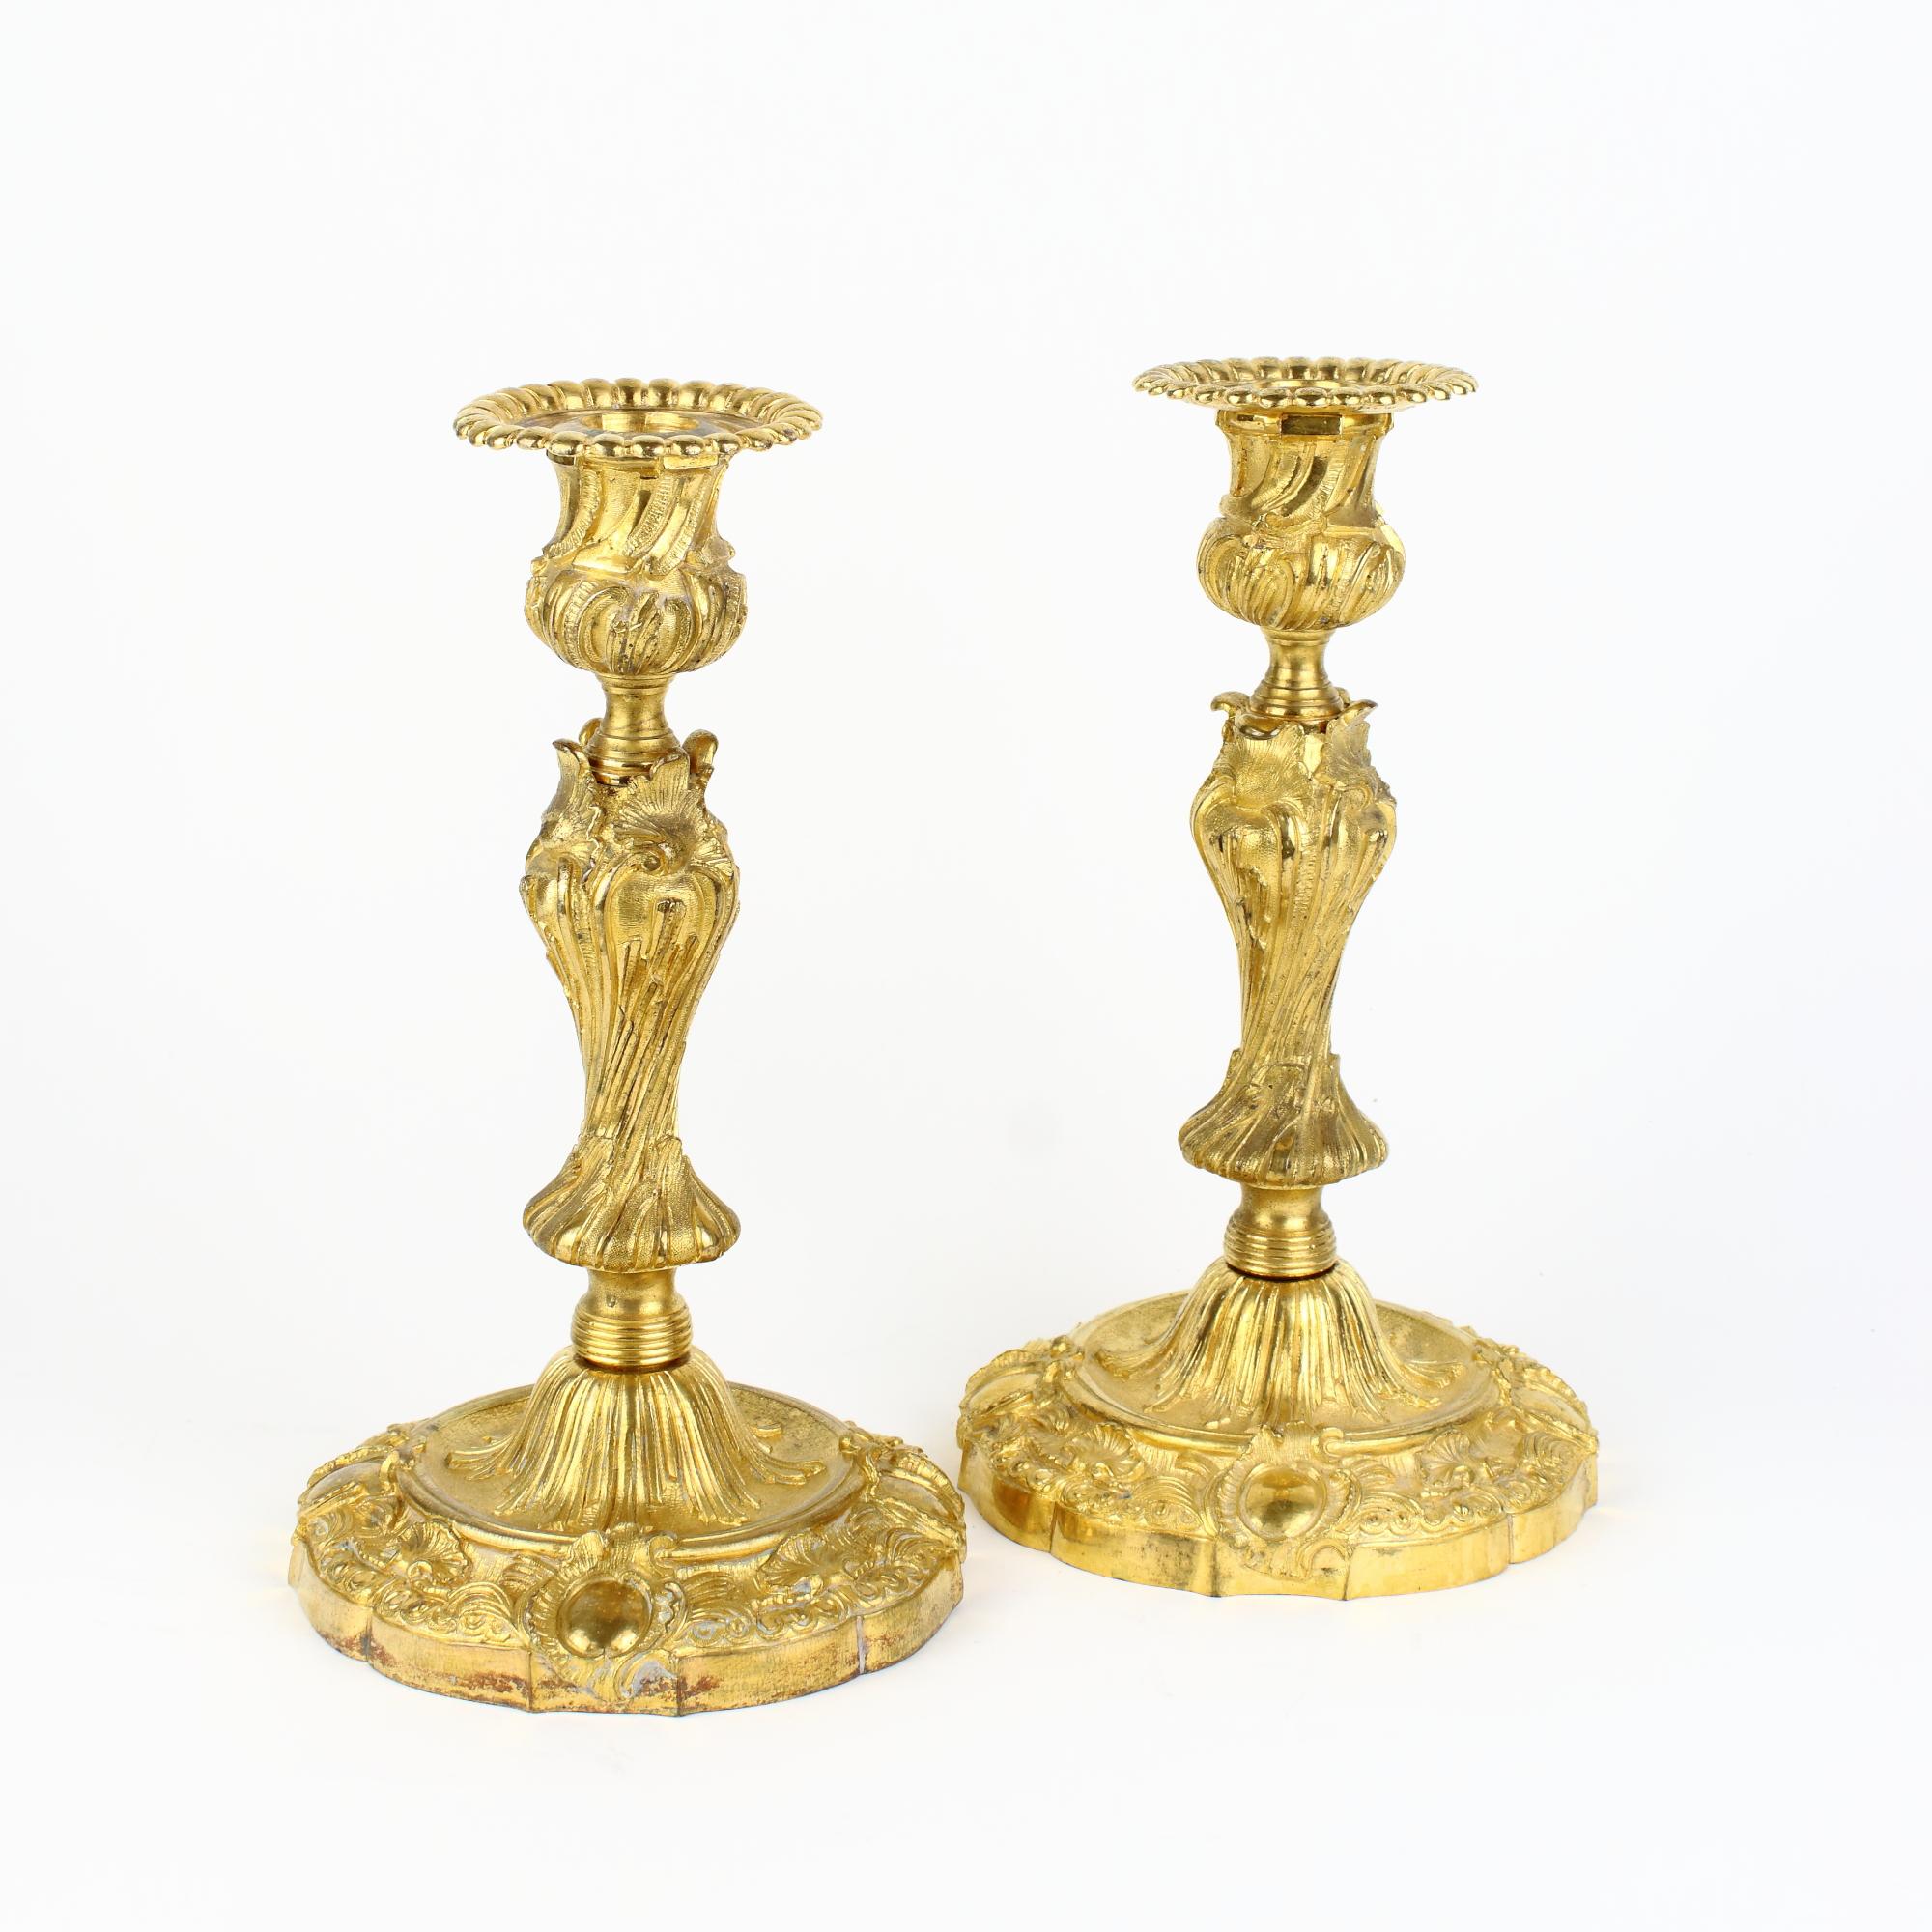 Mid 19th Century French Henri Picard Pair of Louis XV Gilt Bronze Candlesticks In Good Condition For Sale In Berlin, DE